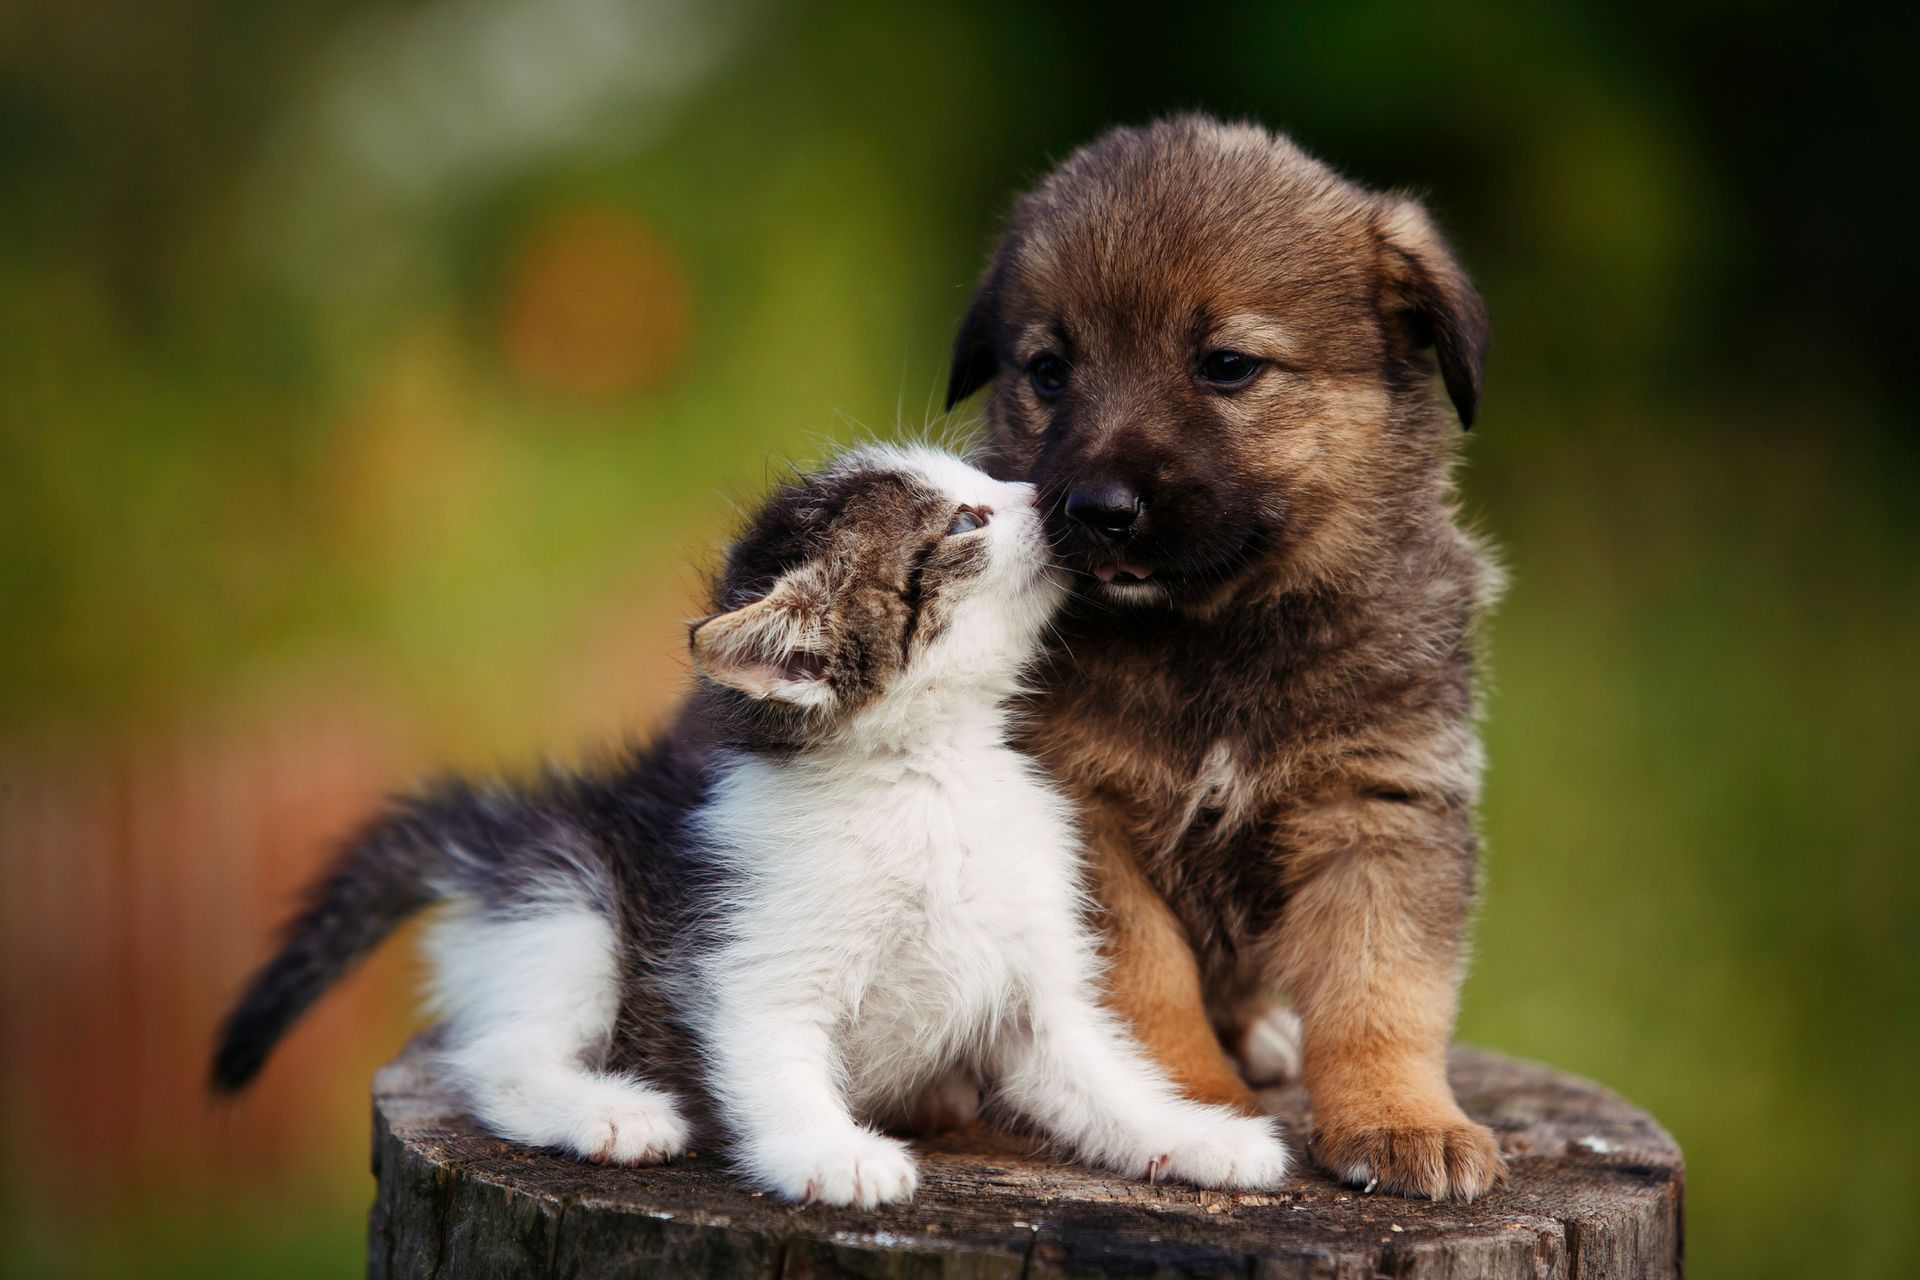 Cute Puppy and Kitten on the Bark Outdoors - Riverview, MI - Riverview Animal Hospital